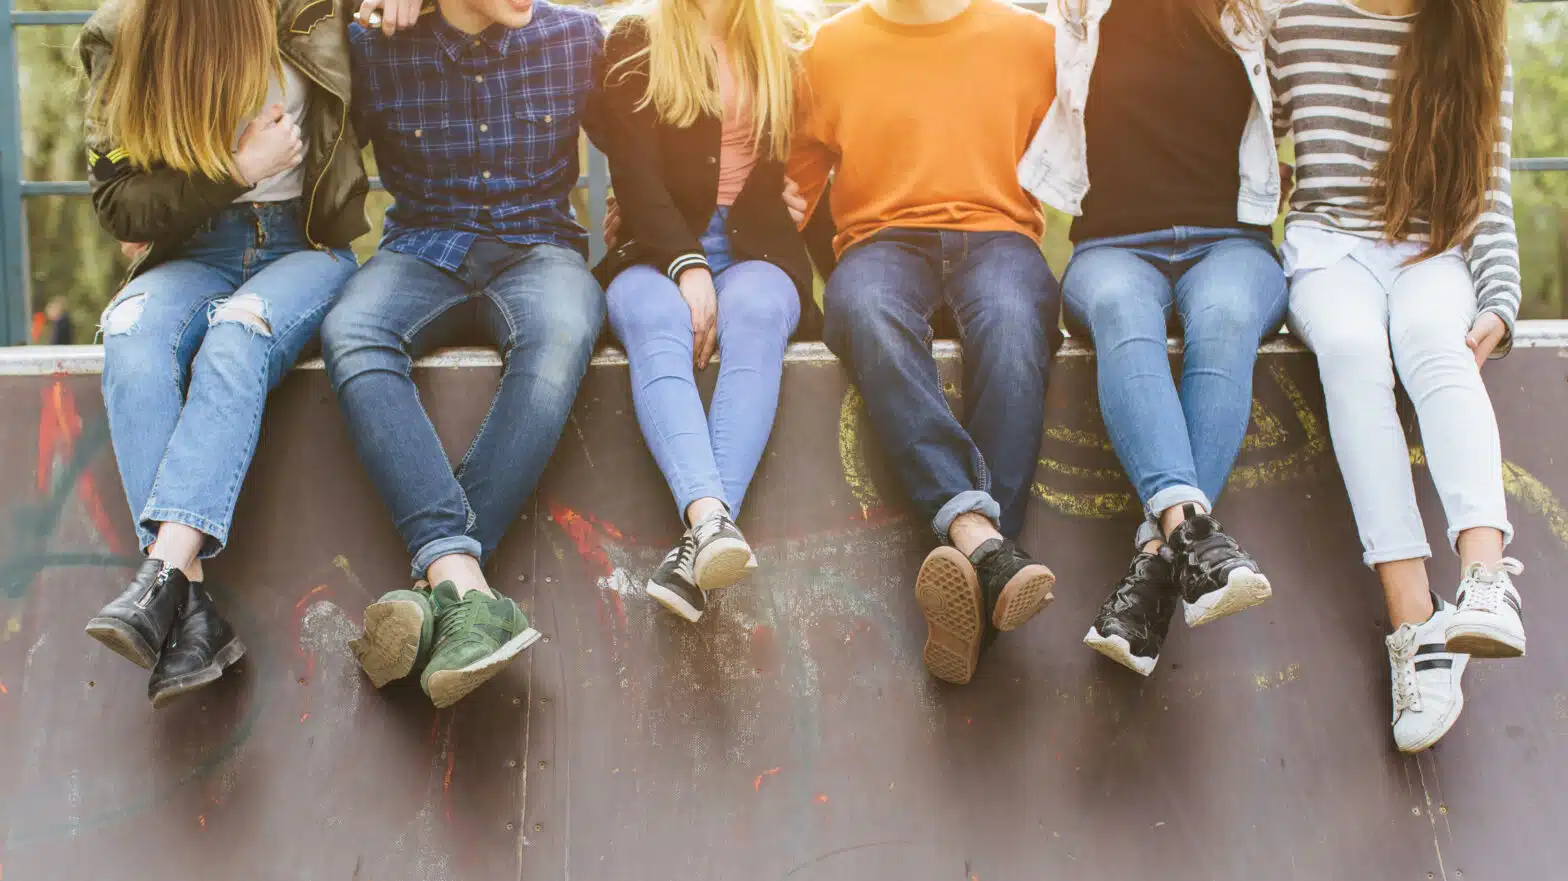 A group of teens sit on a wall dangling their legs - Massachusetts Juvenile Drug Use Statistics